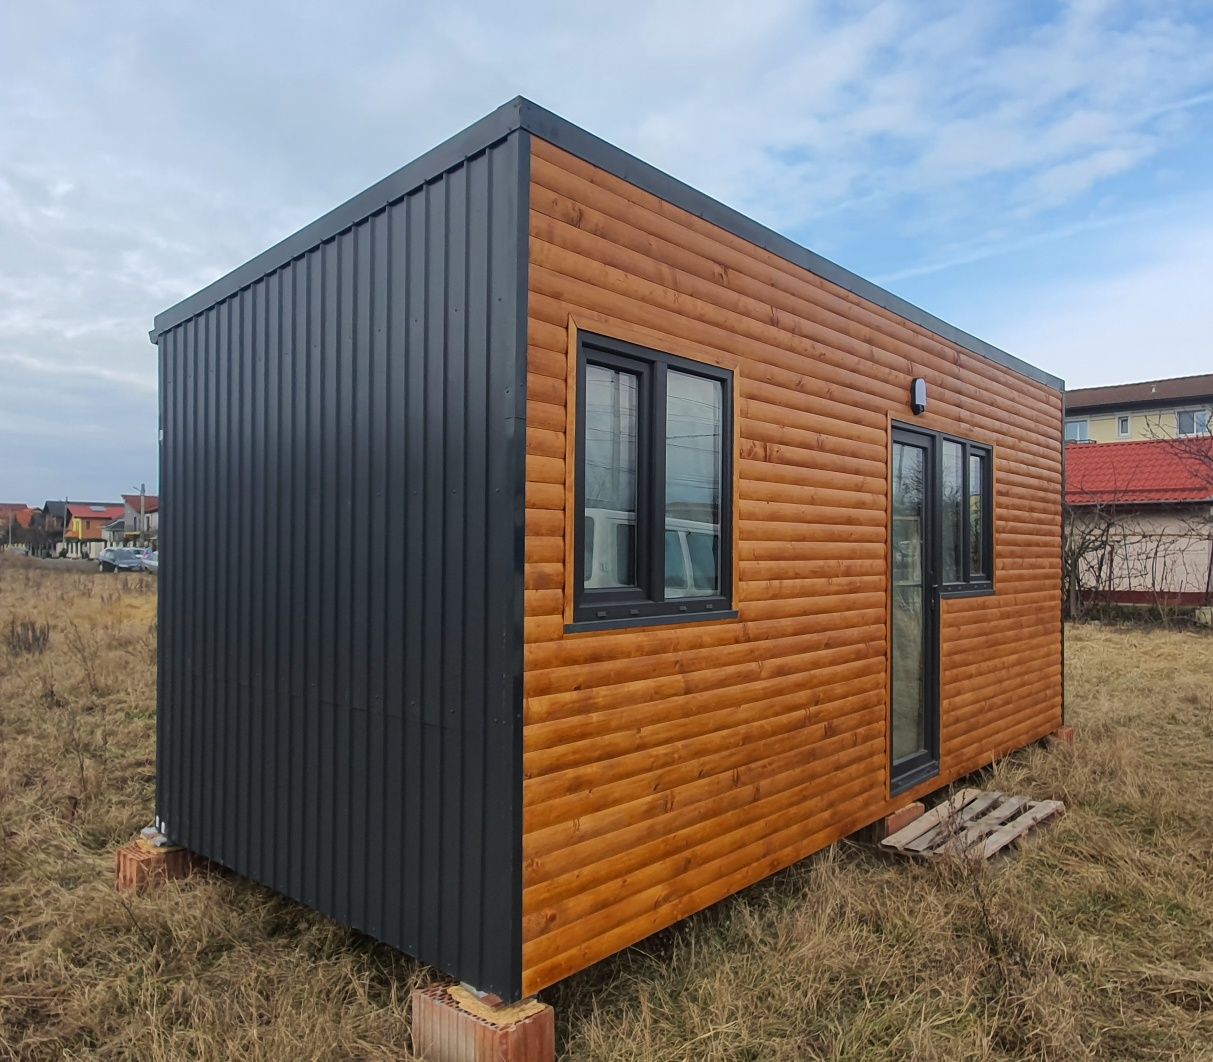 Tiny House lux / complet mobilat